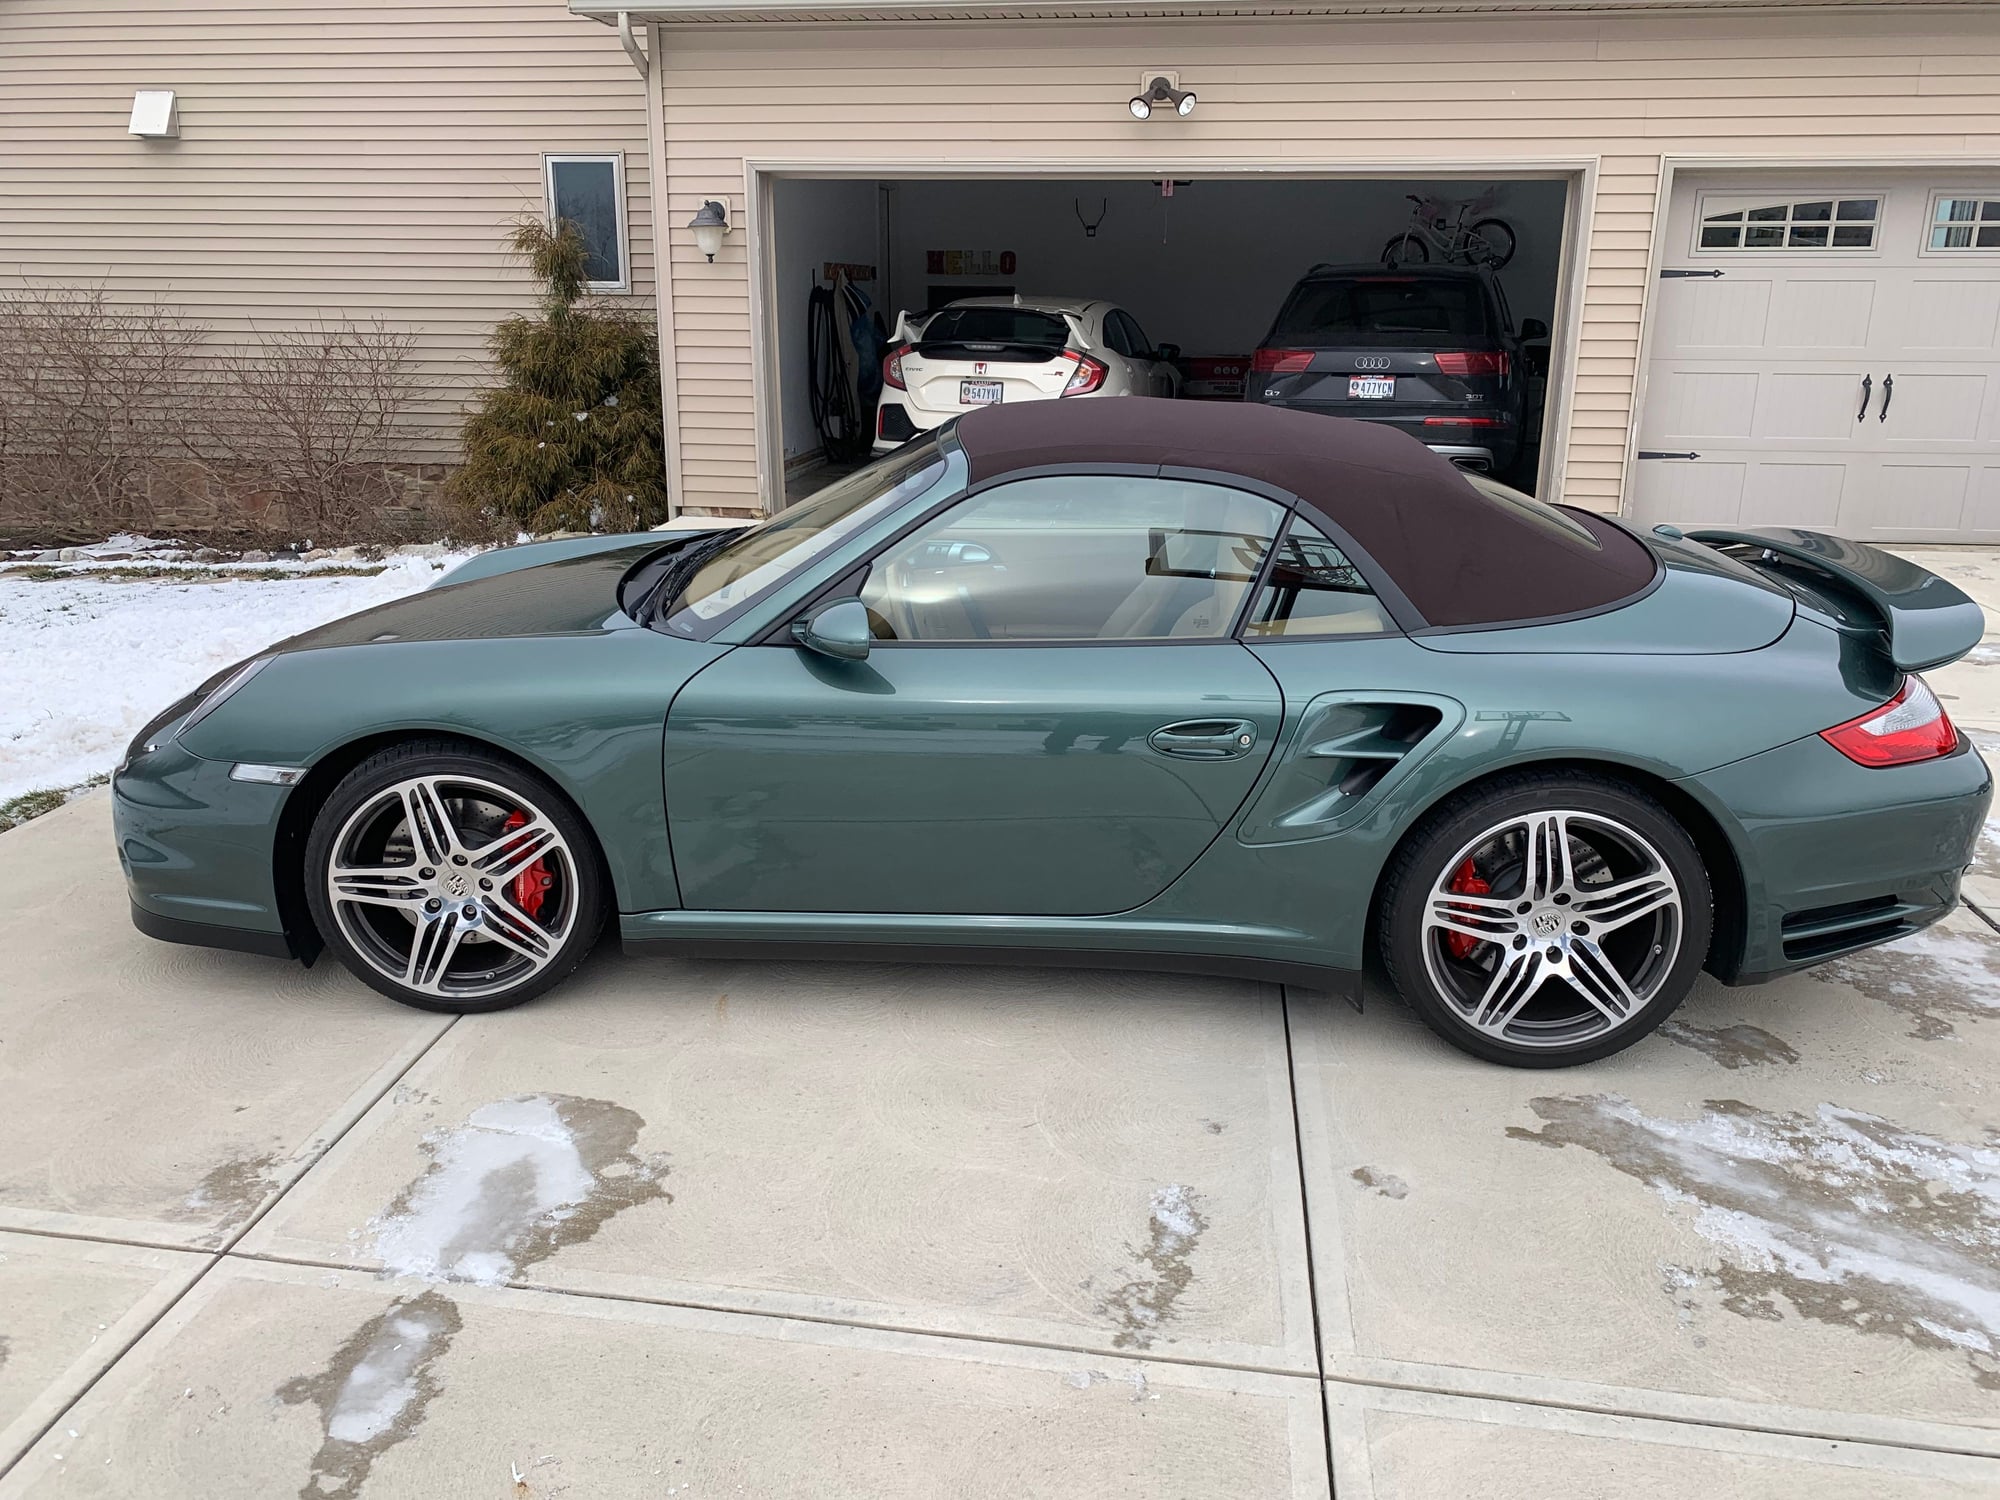 2009 Porsche 911 - 2009 TT Cab - Manual - Used - VIN WP0CD29979S773404 - 14,600 Miles - 6 cyl - AWD - Manual - Convertible - Other - Chagrin Falls, OH 44023, United States